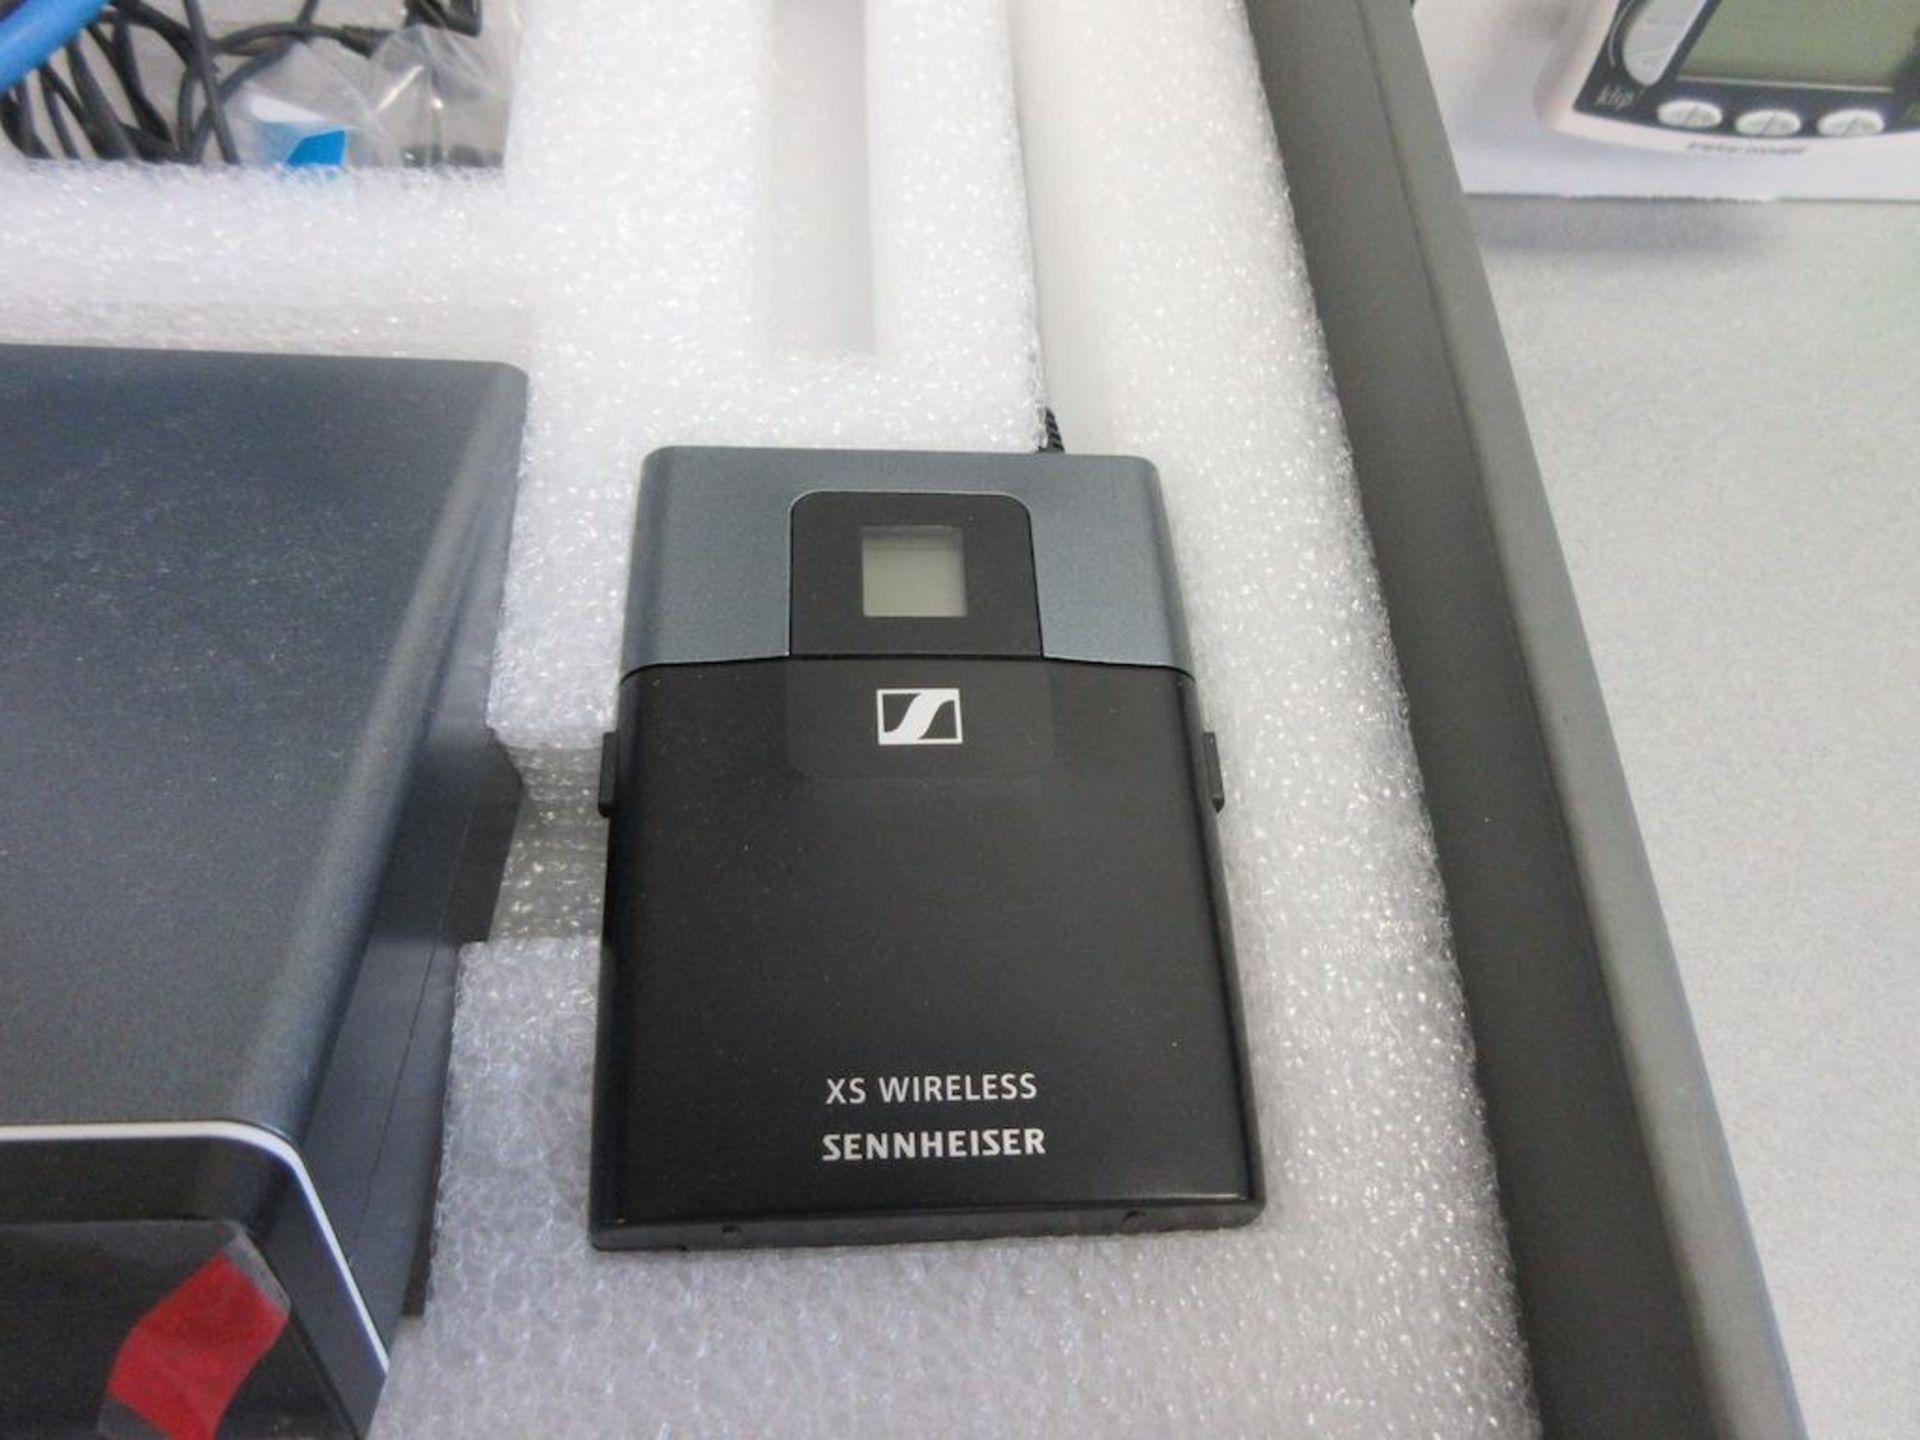 SENNHEISER XS WIRELESS 1 MICROPHONE W/ SOUND CABLE - Image 2 of 3